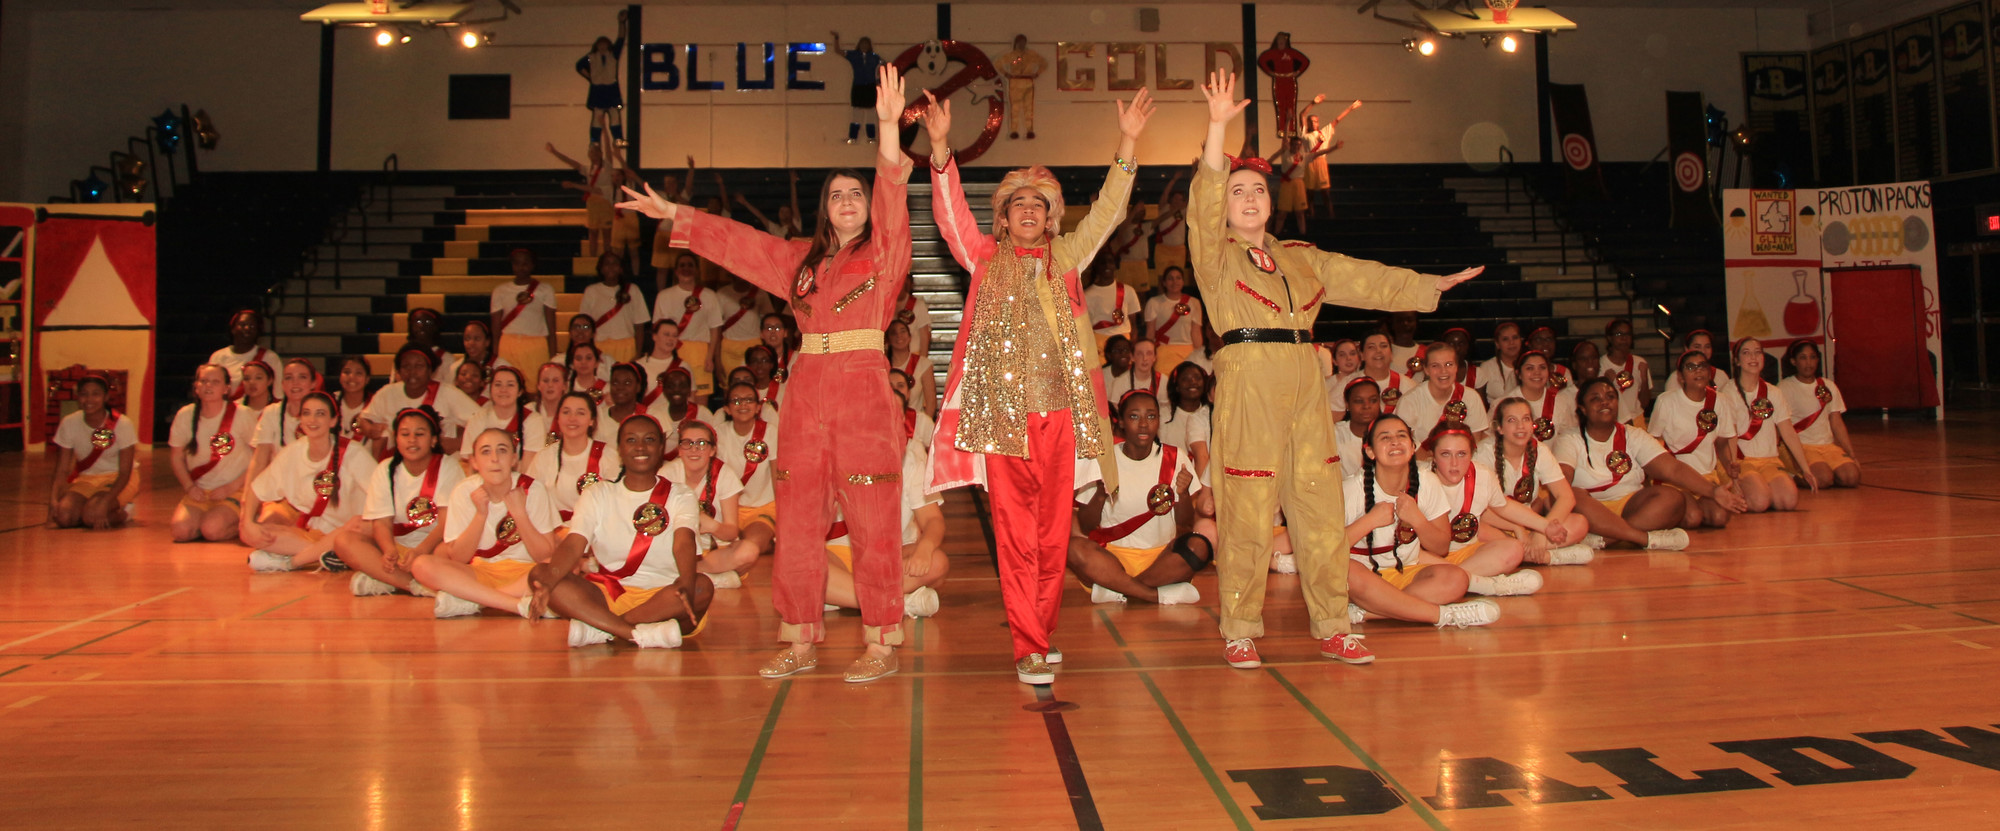 The Gold Team danced and sang songs based on the Ghostbusters theme. From left were, Angela Heffernan, 17, Tyler Ortiz, 16, and Keara McAdams, 17.